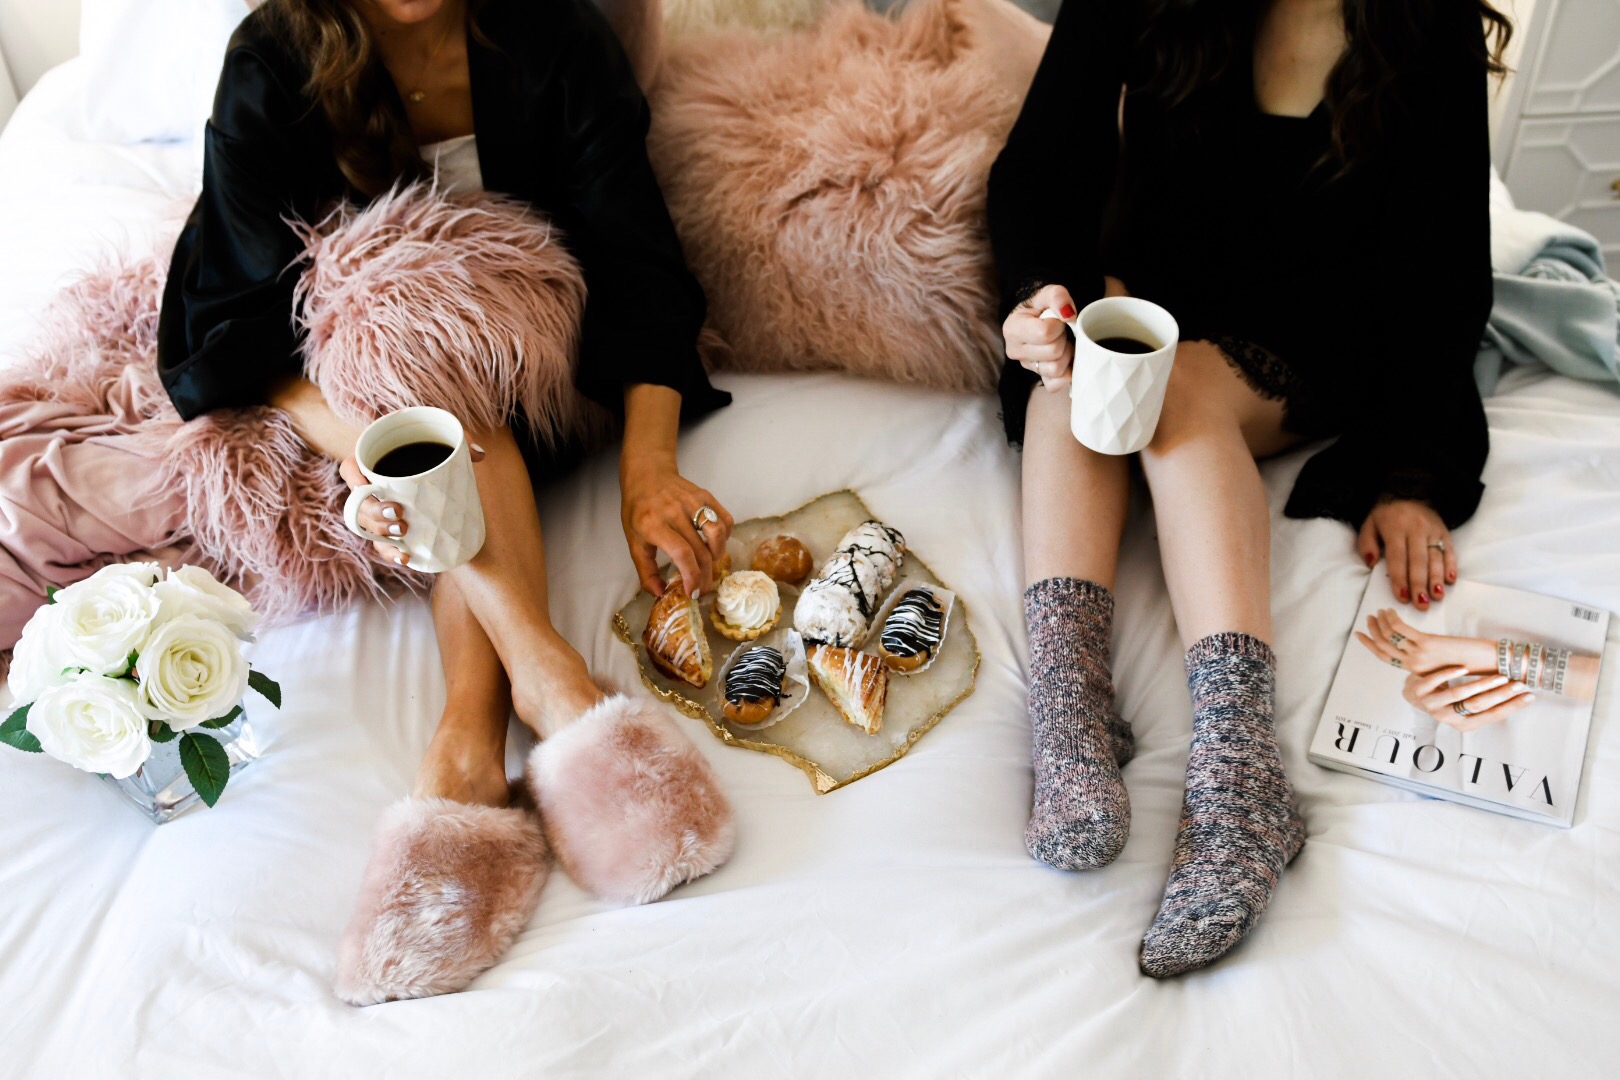 Girls' Night In With Valour Magazine Esther Santer Fashion Blog NYC Street Style Blogger Outfit OOTD Trendy Eishes Style Cozy Blanket Throw Pillows Flowers Desserts Pastries Black Robes Pink Fur Fuzzy Slippers Jcrew Adore Me Socks  Mugs Coffee  Women.jpg